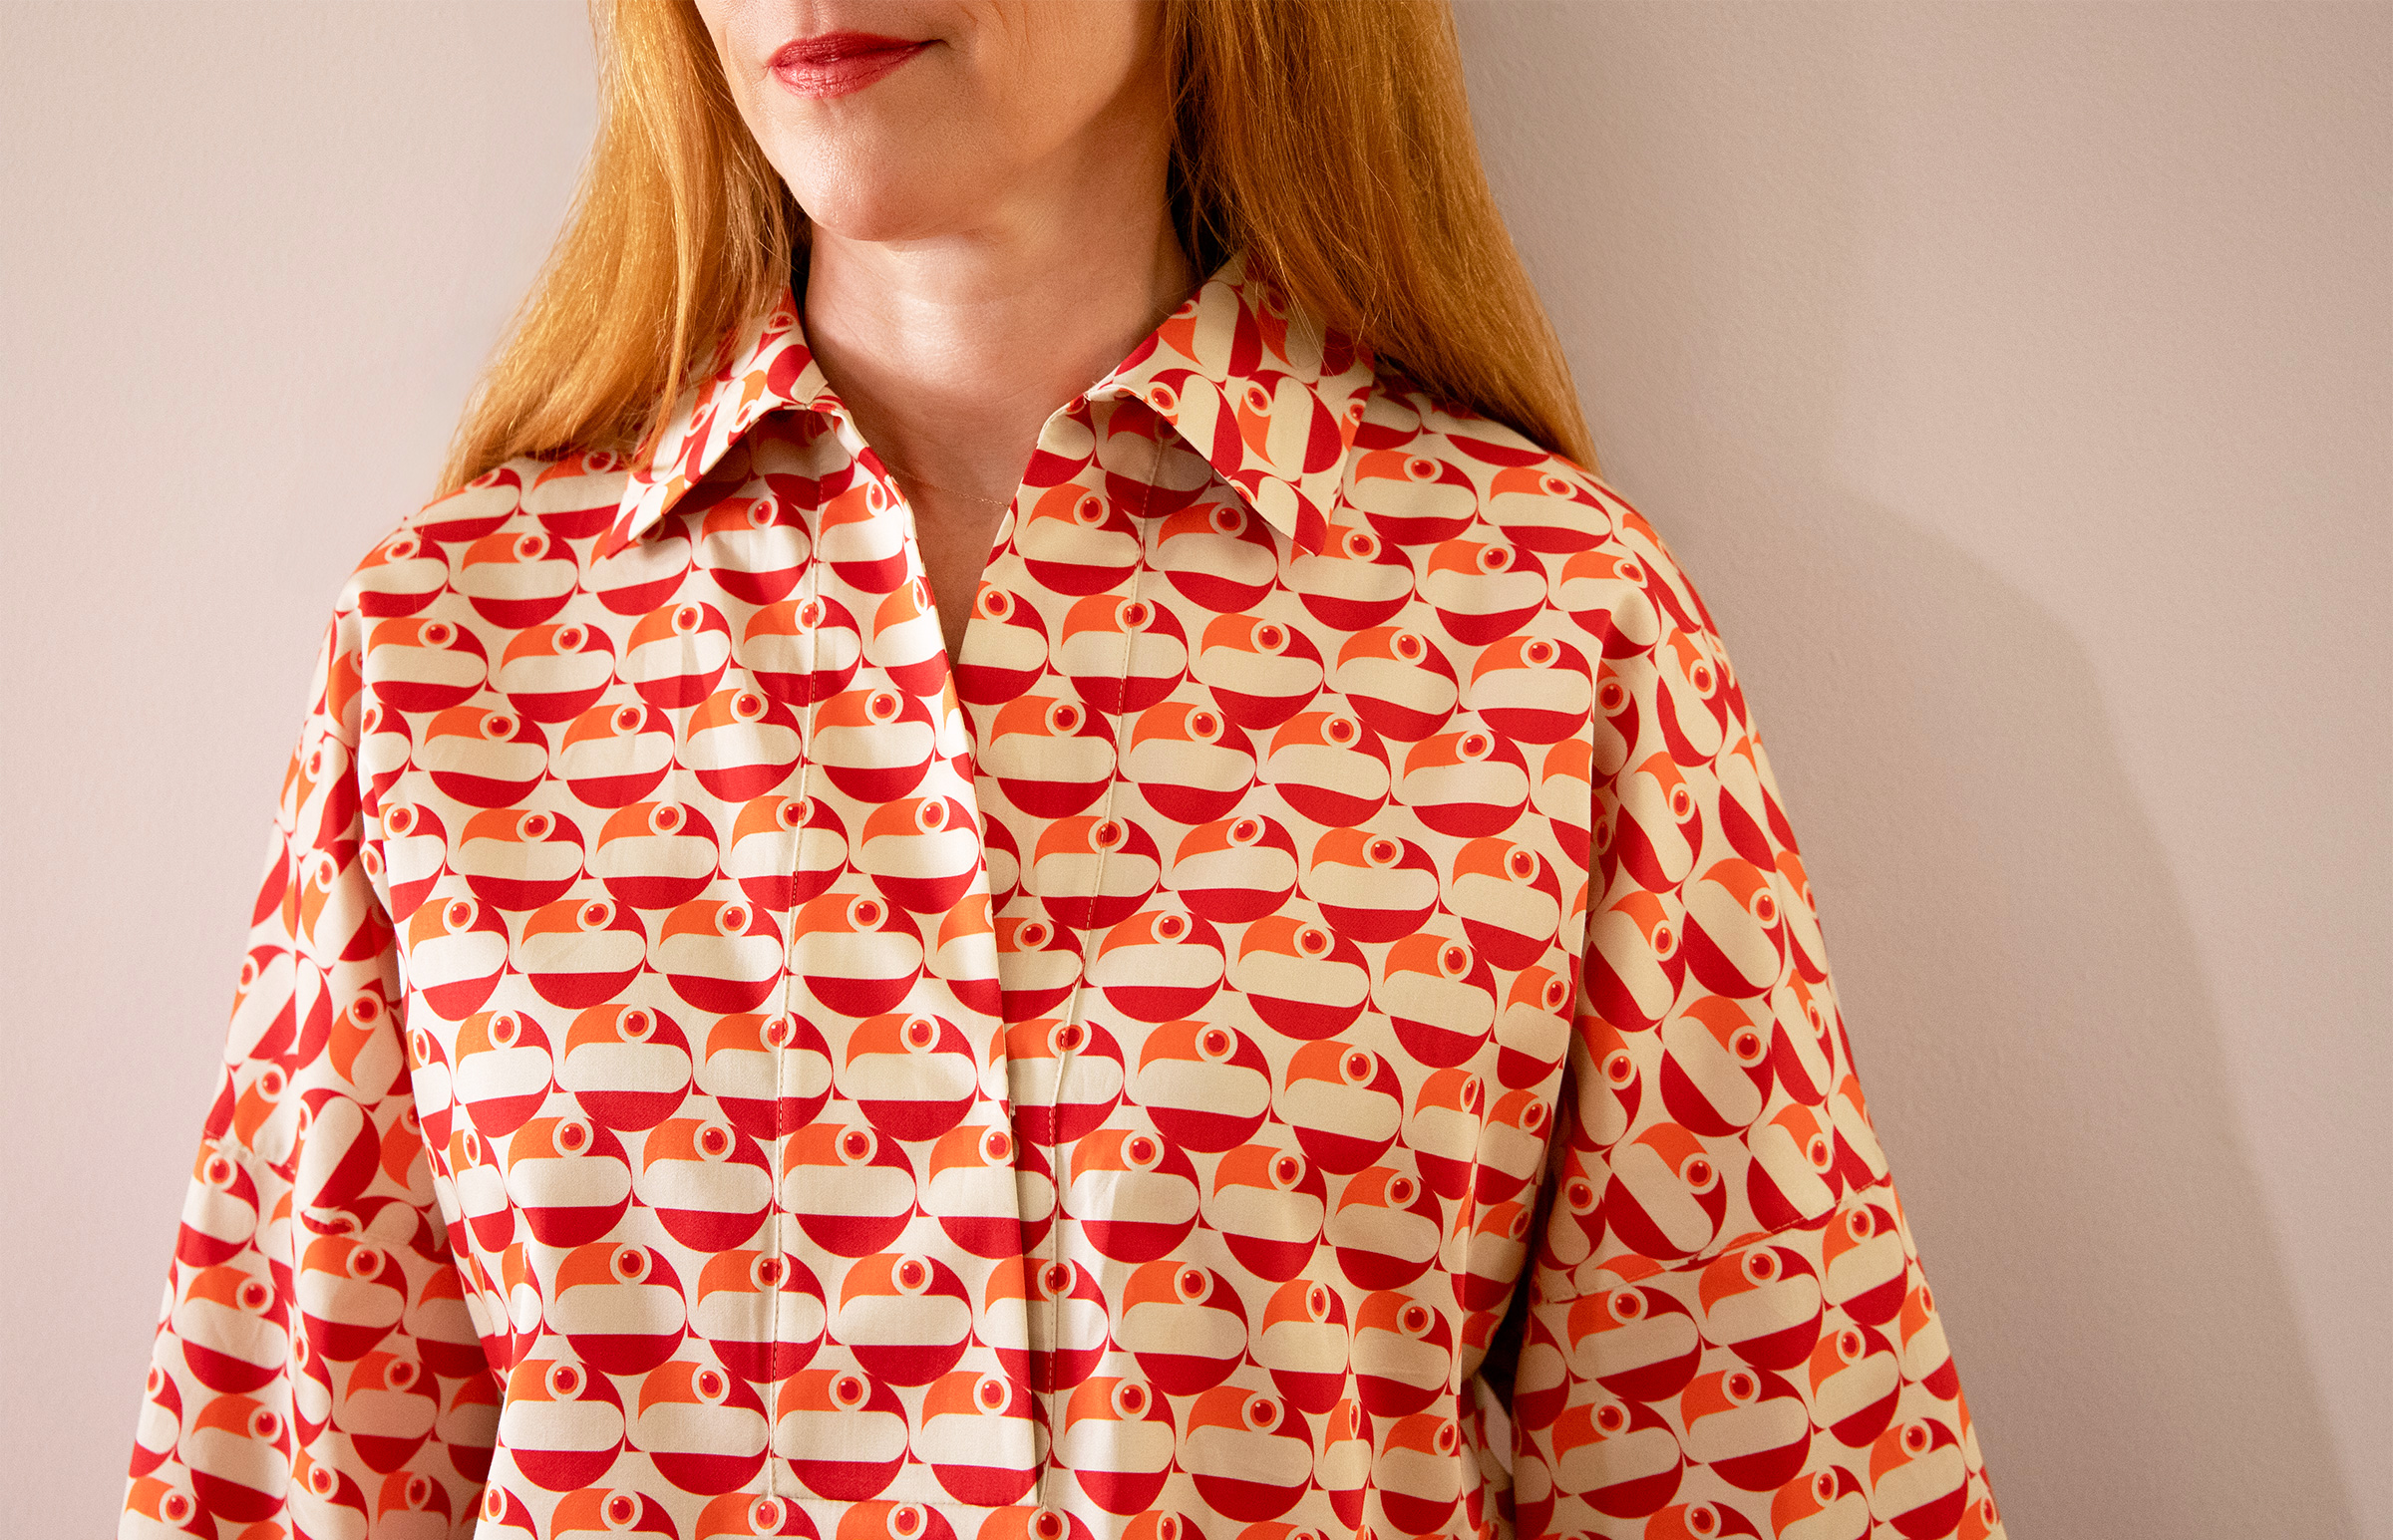 red haired woman wearing a shirt with red and orange pelican pattern